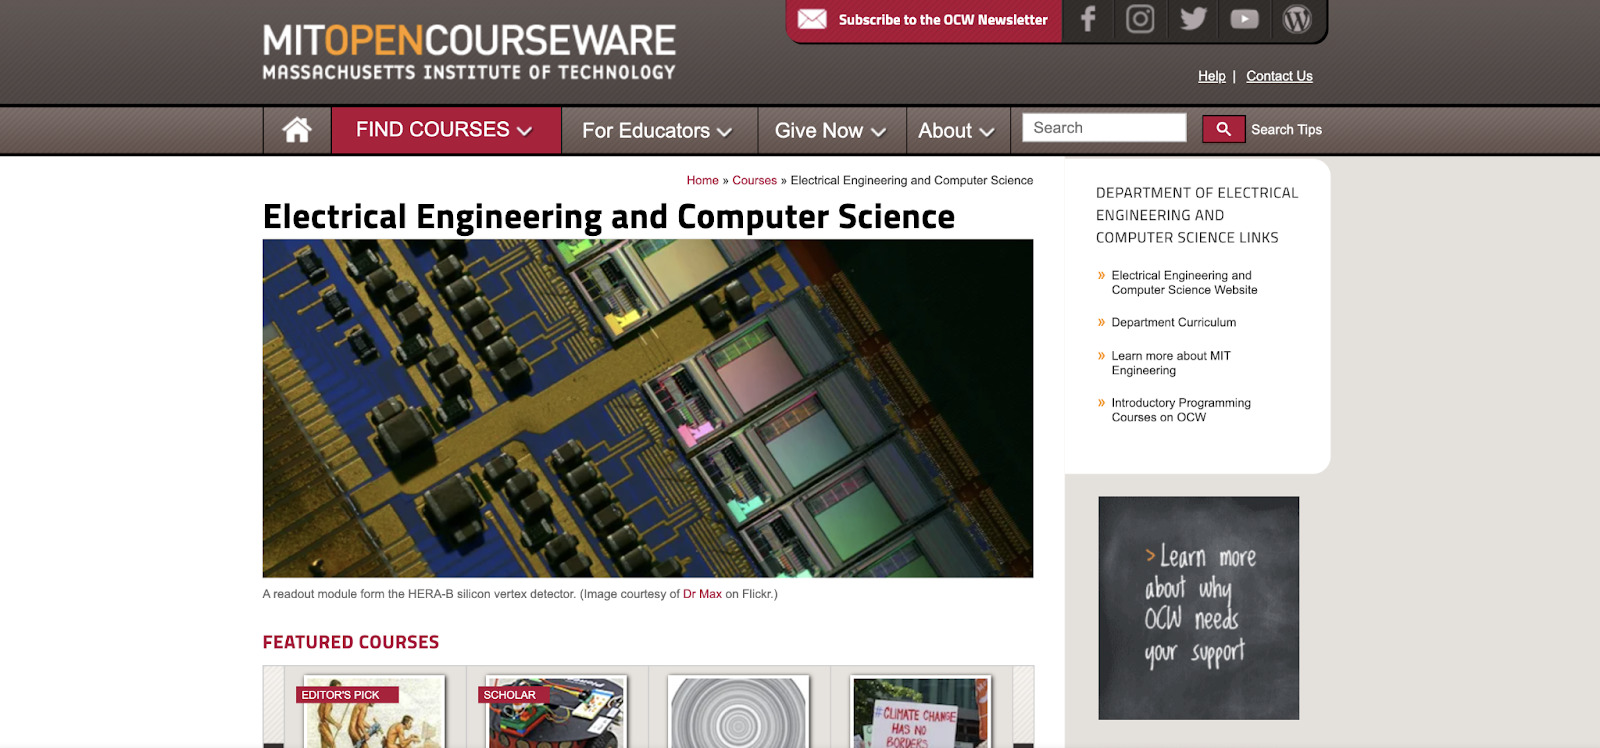 The MIT OpenCourseware homepage